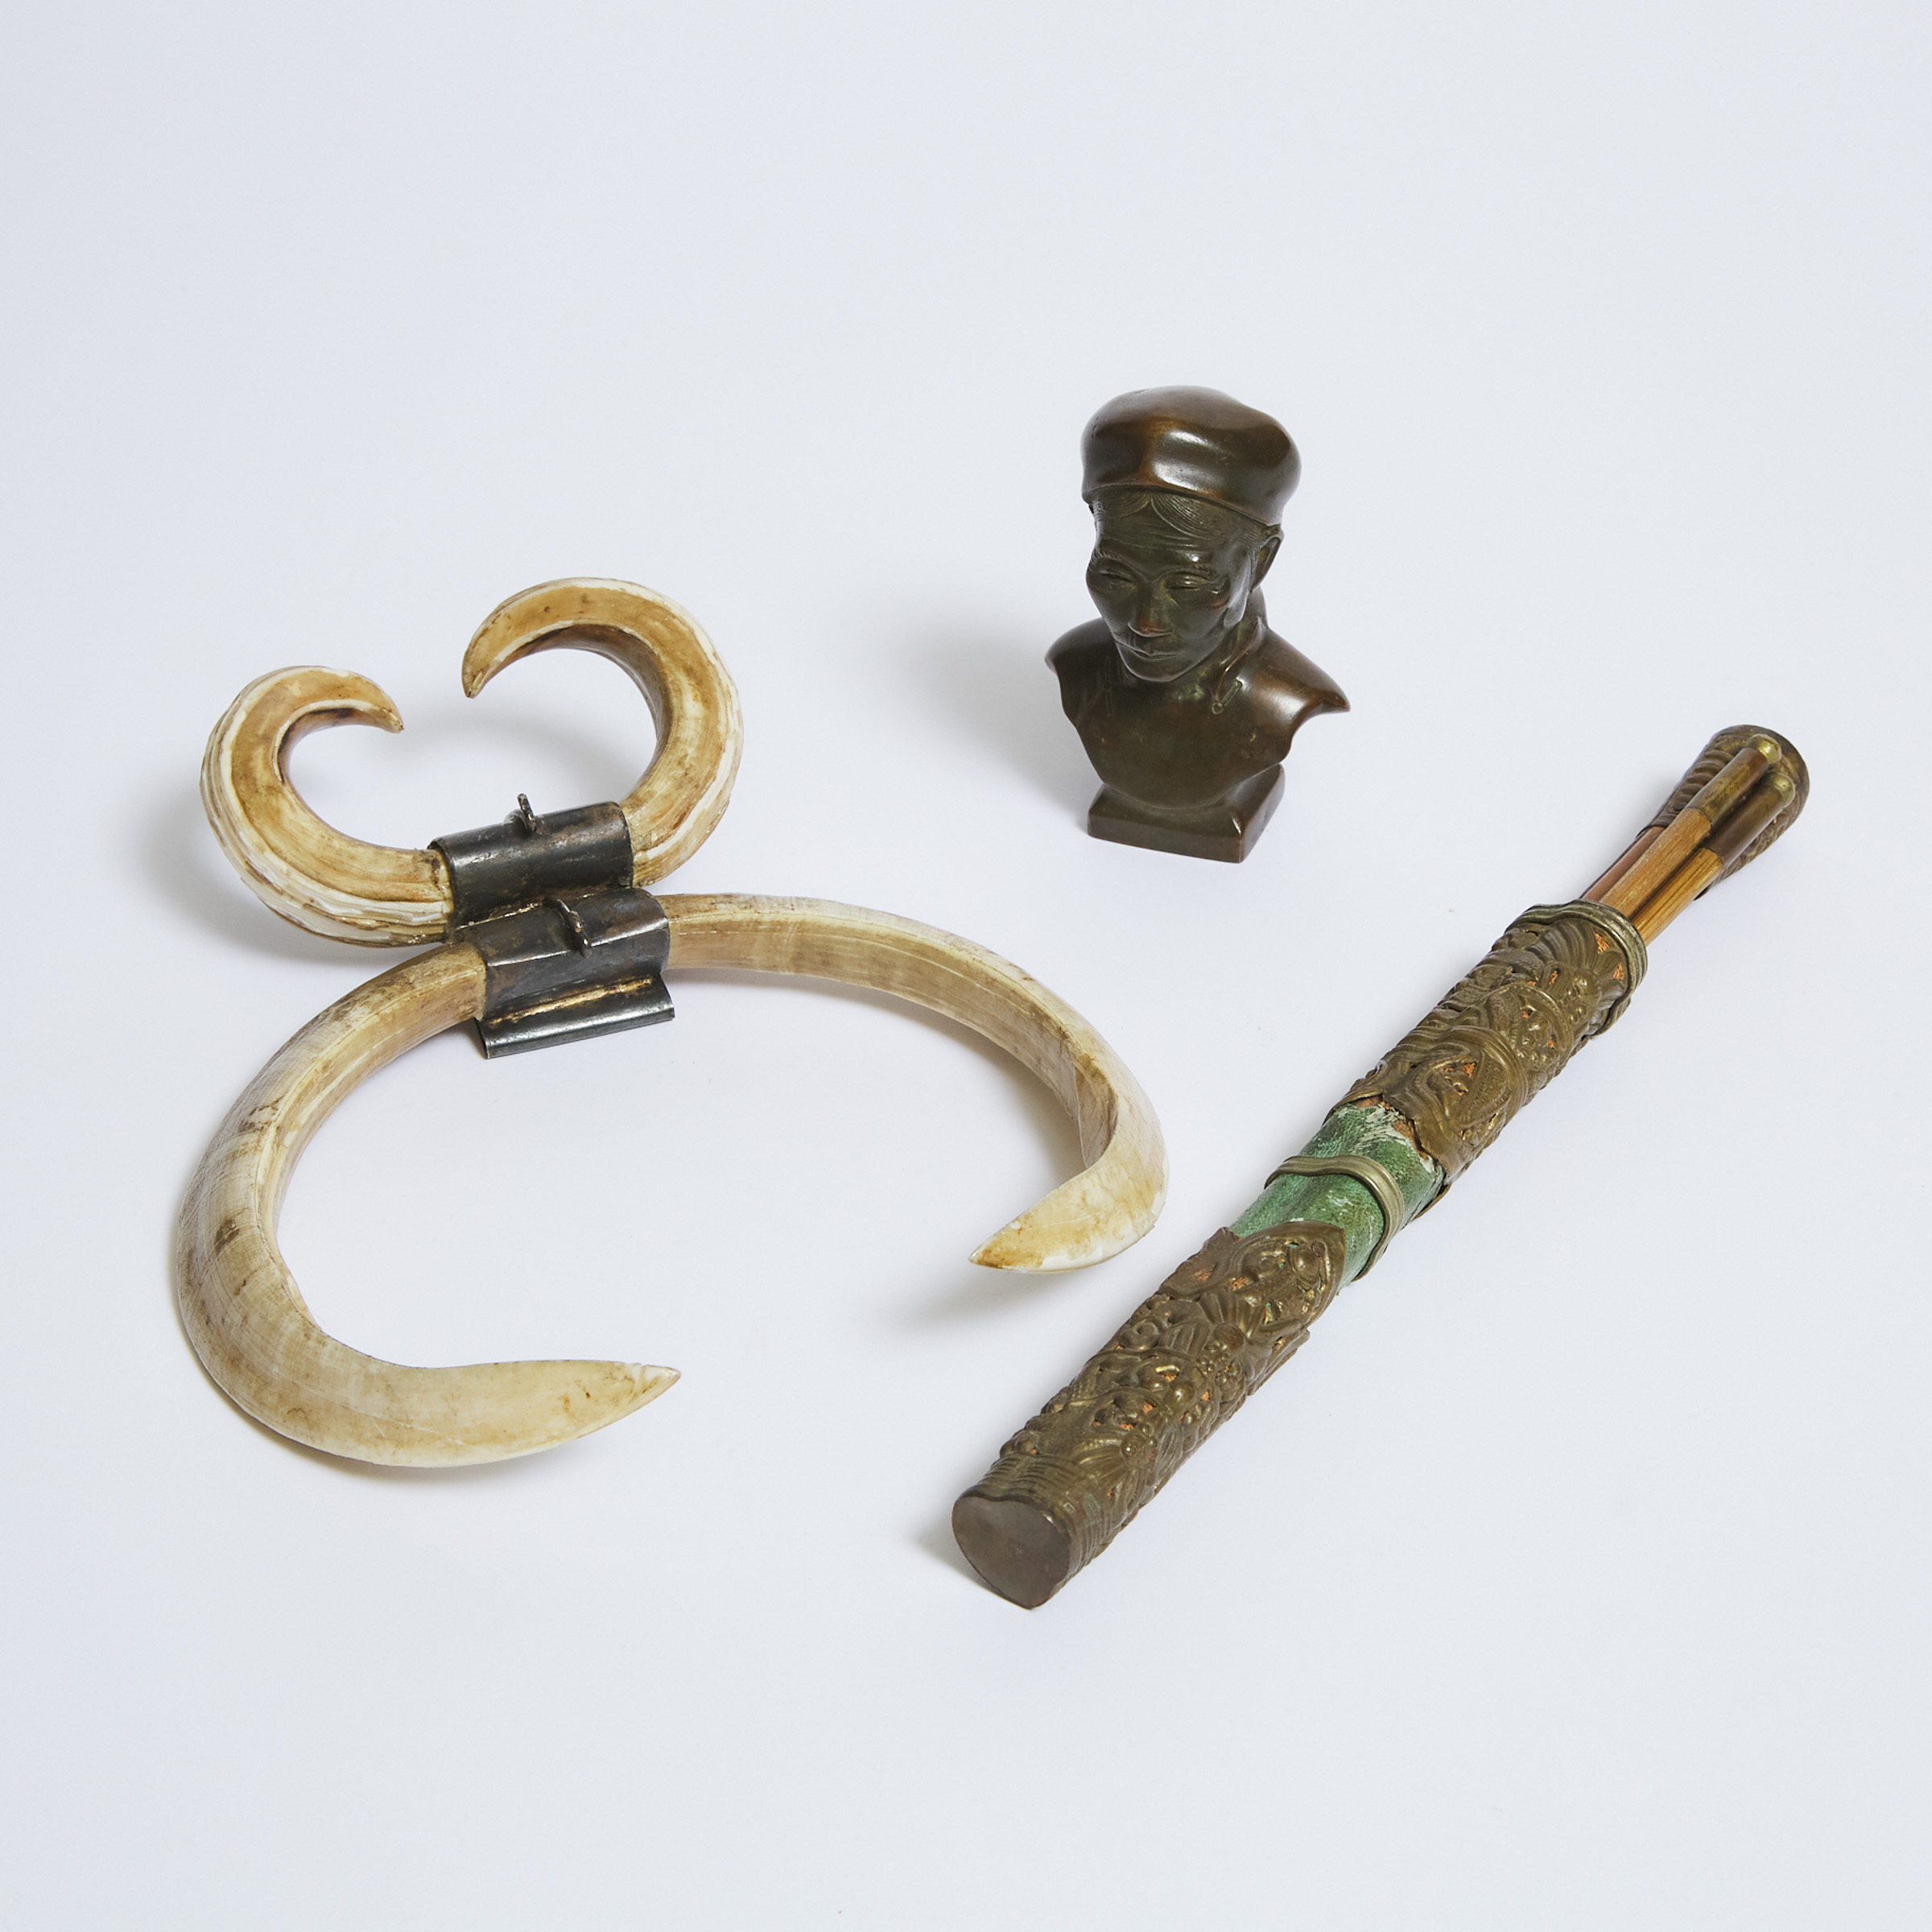 Three Disparate Indonesian Items, early-mid 20th century